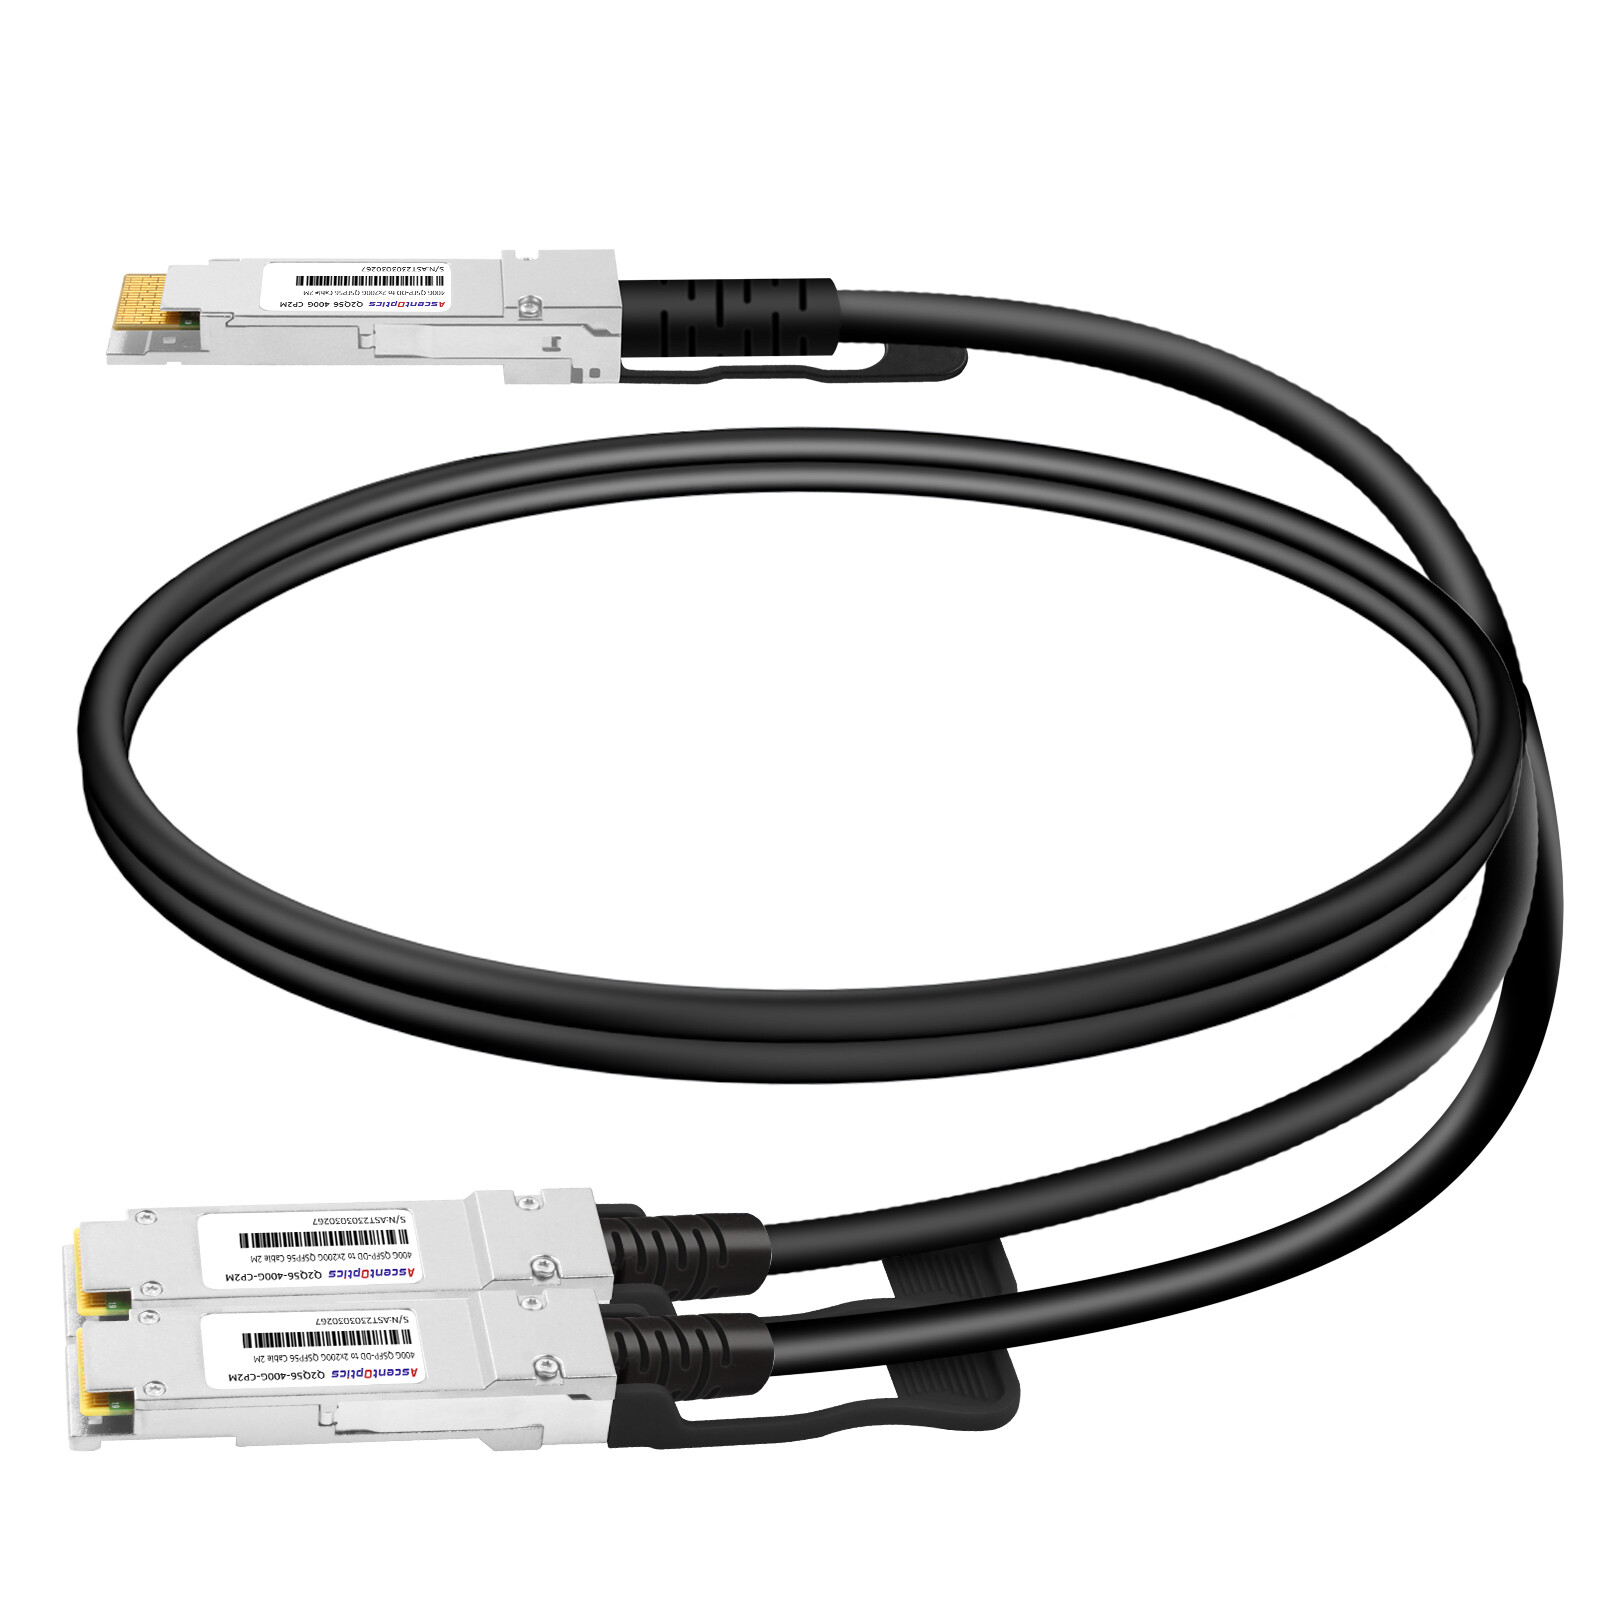 400G QSFP-DD to 2x 200G QSFP56 Copper Breakout Cable,2 Meters,Passive